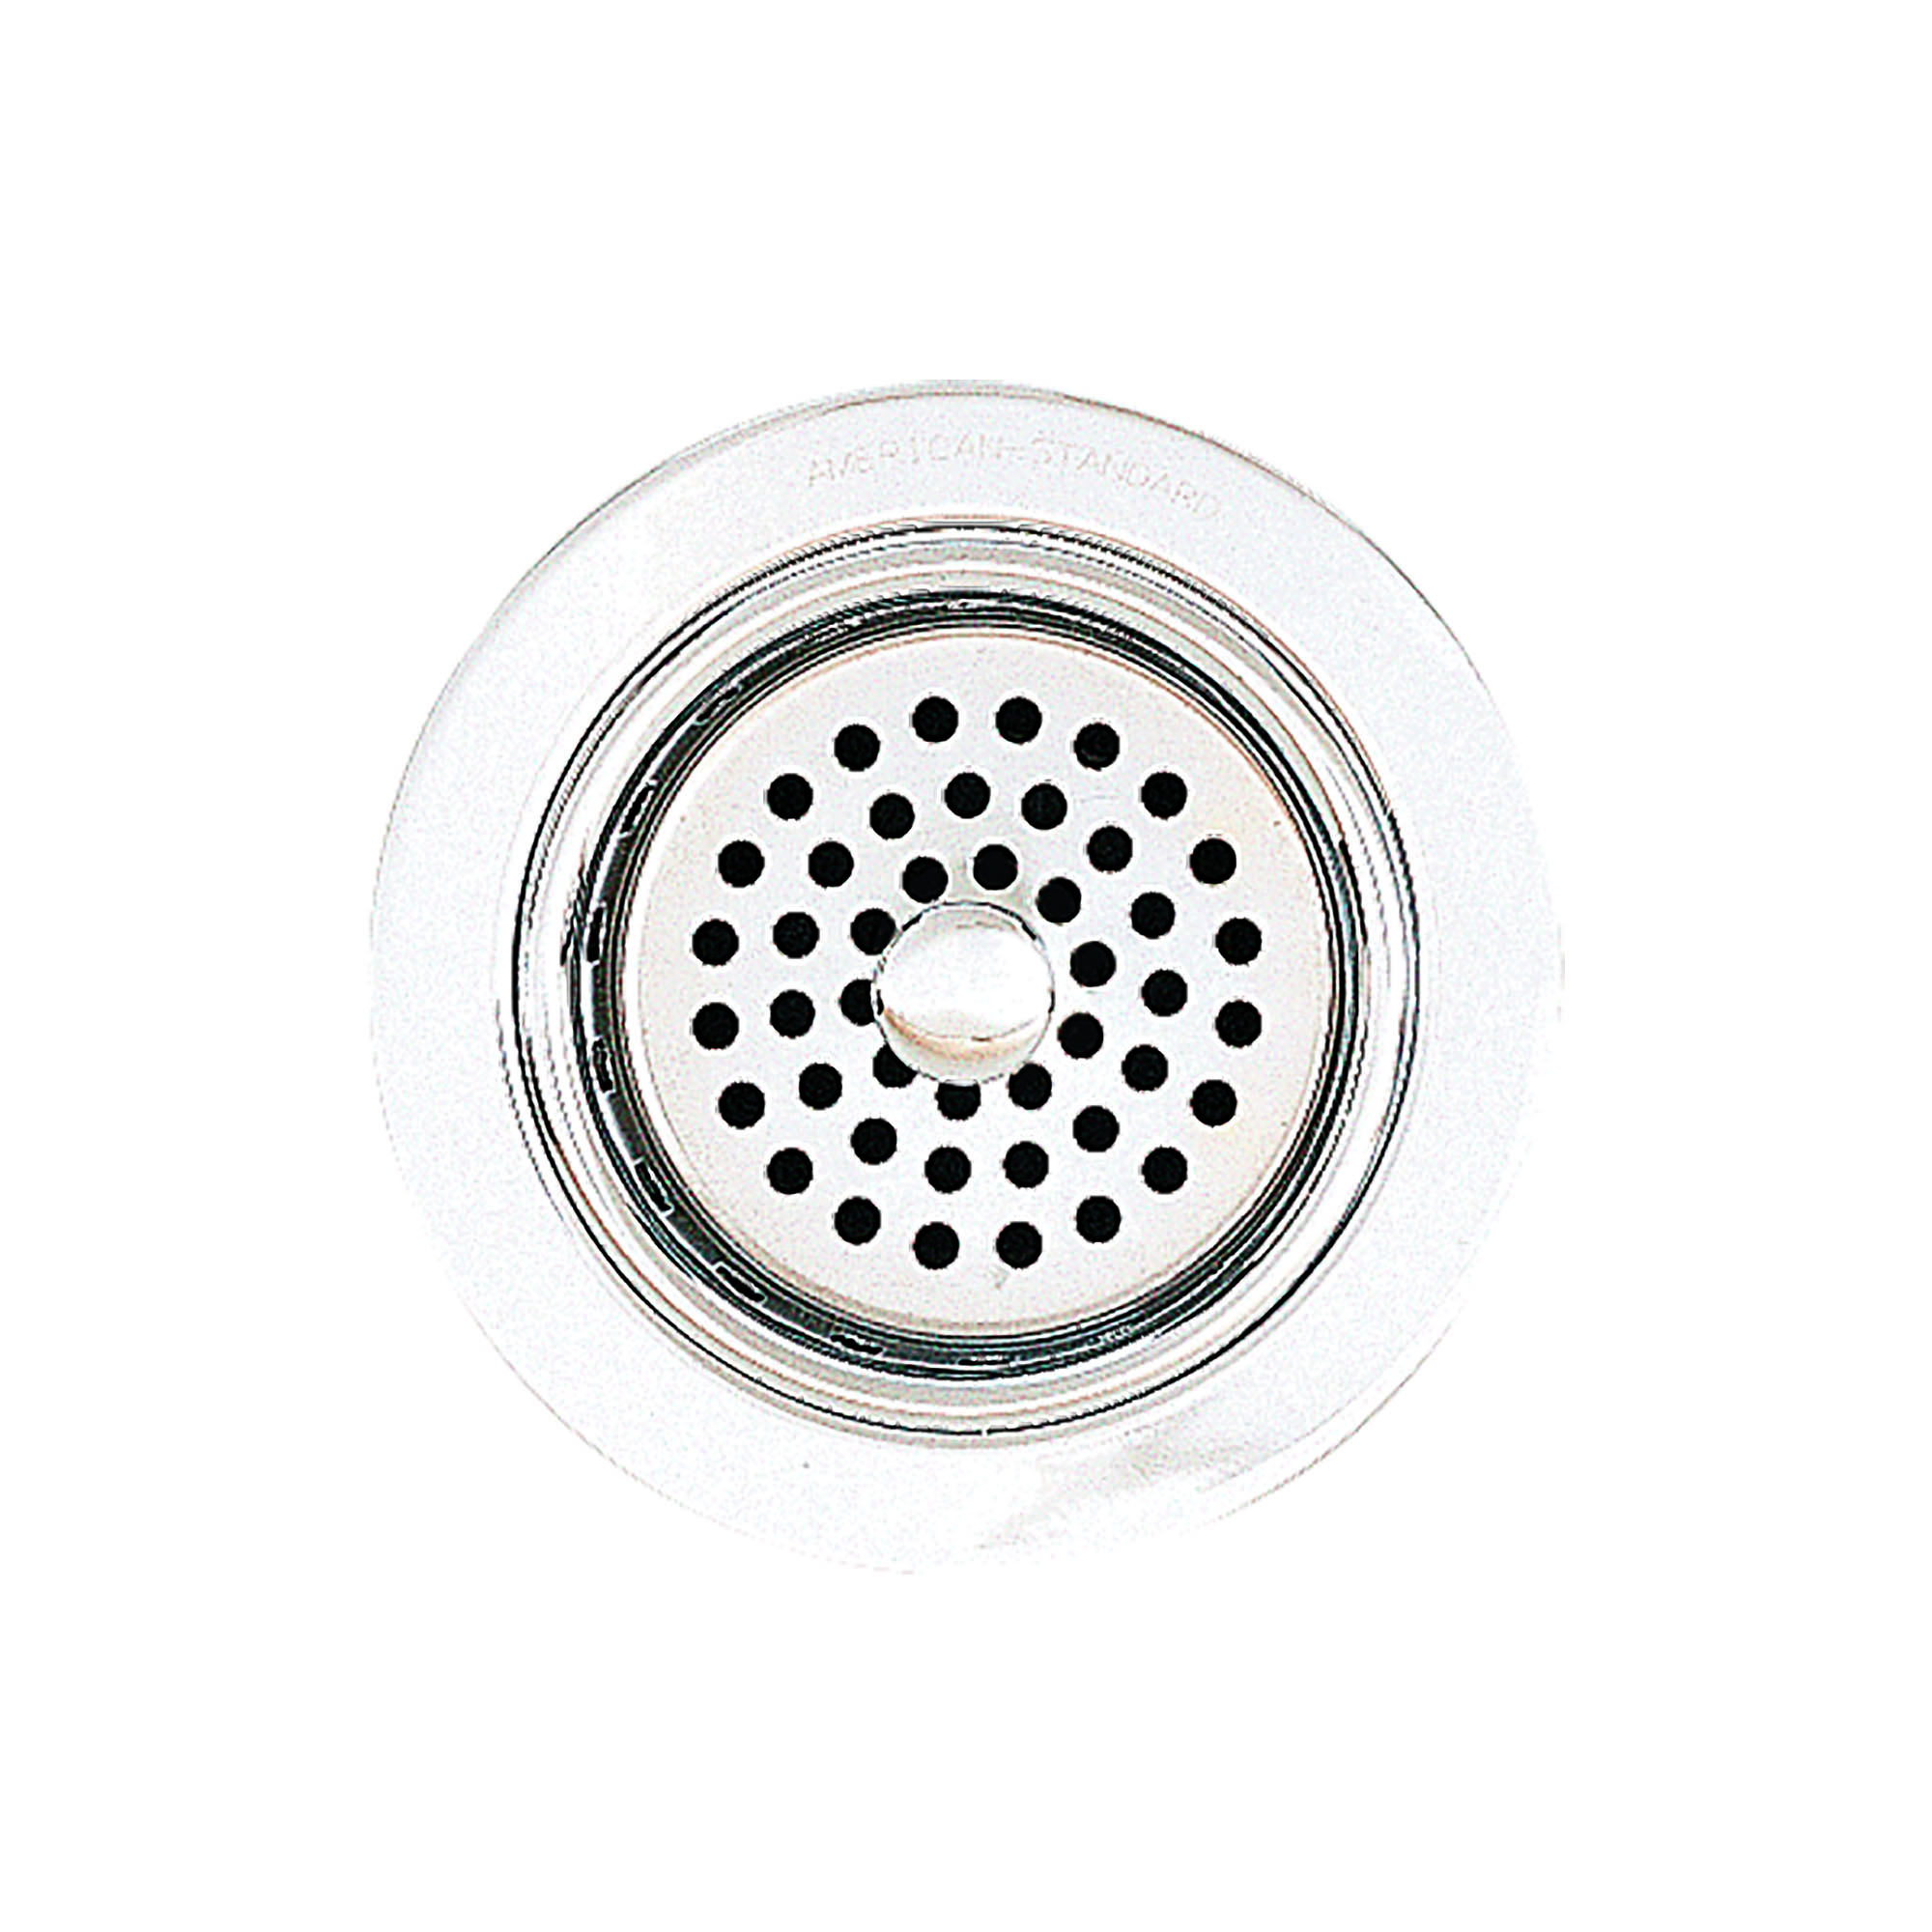 How To Remove American Standard Bathroom Sink Drain Stopper